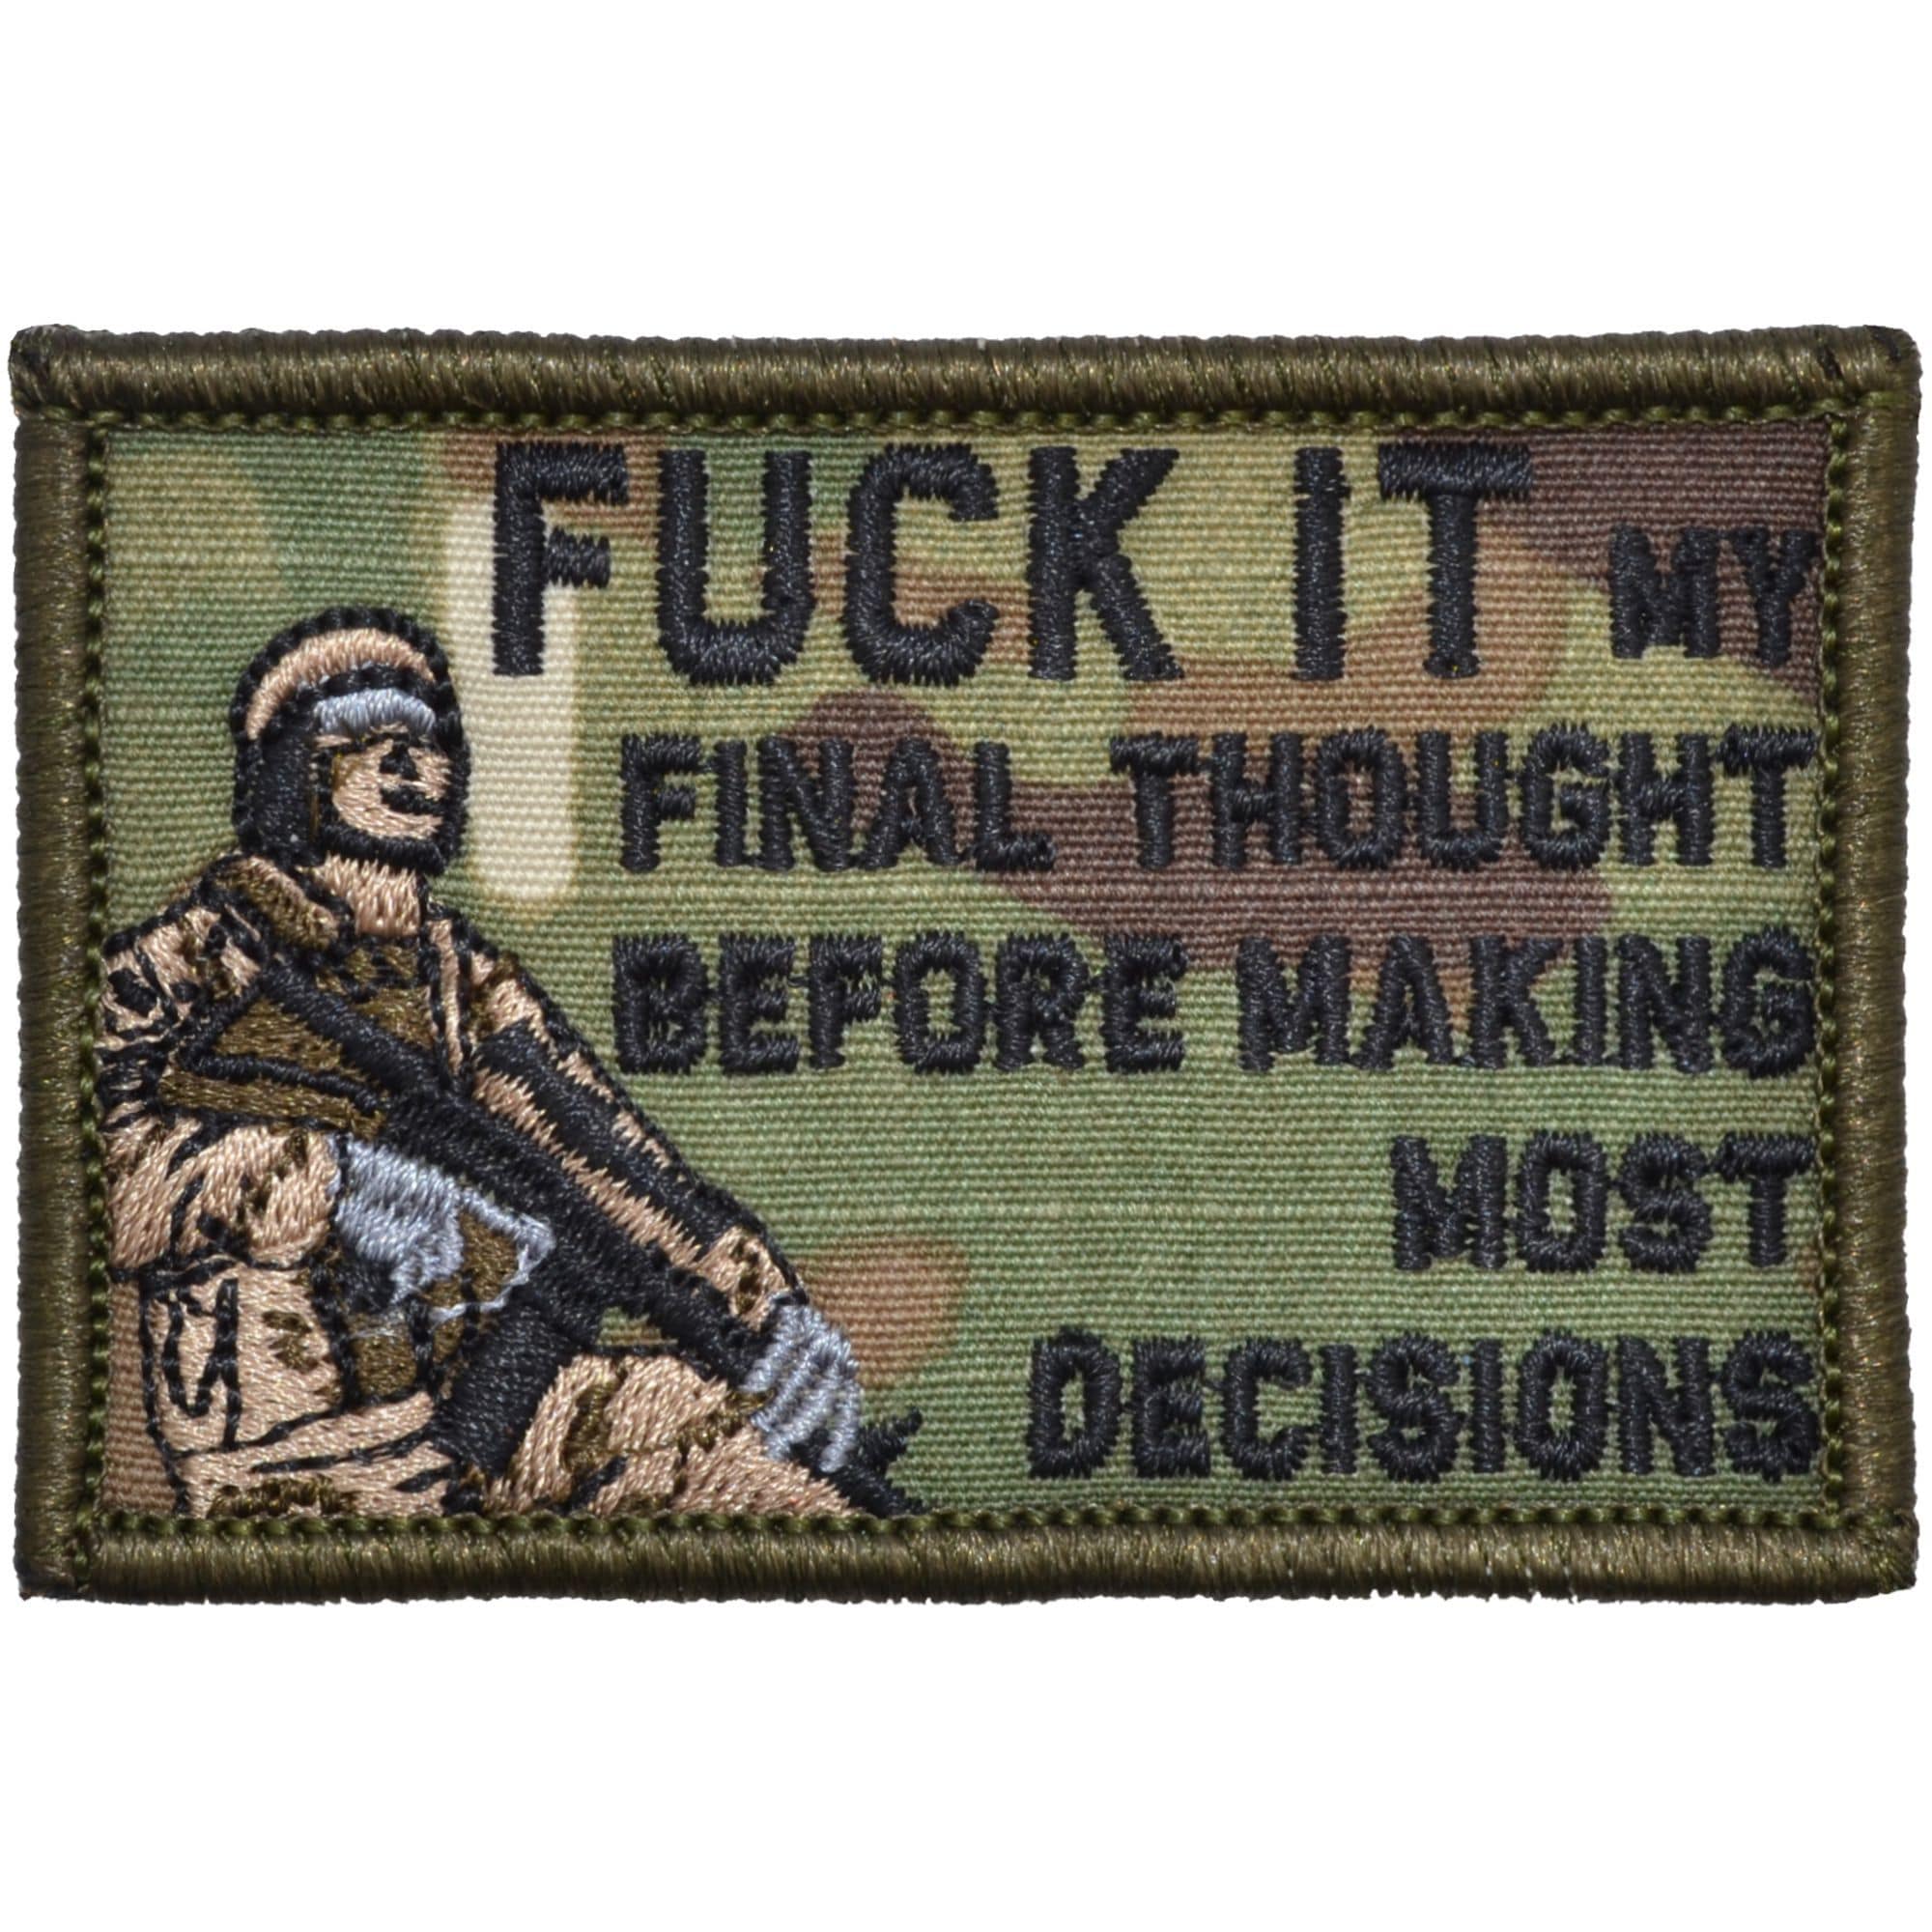 Tactical Gear Junkie Patches MultiCam Fuck It My Final Thought Before Making Most Decisions - 2x3 Patch